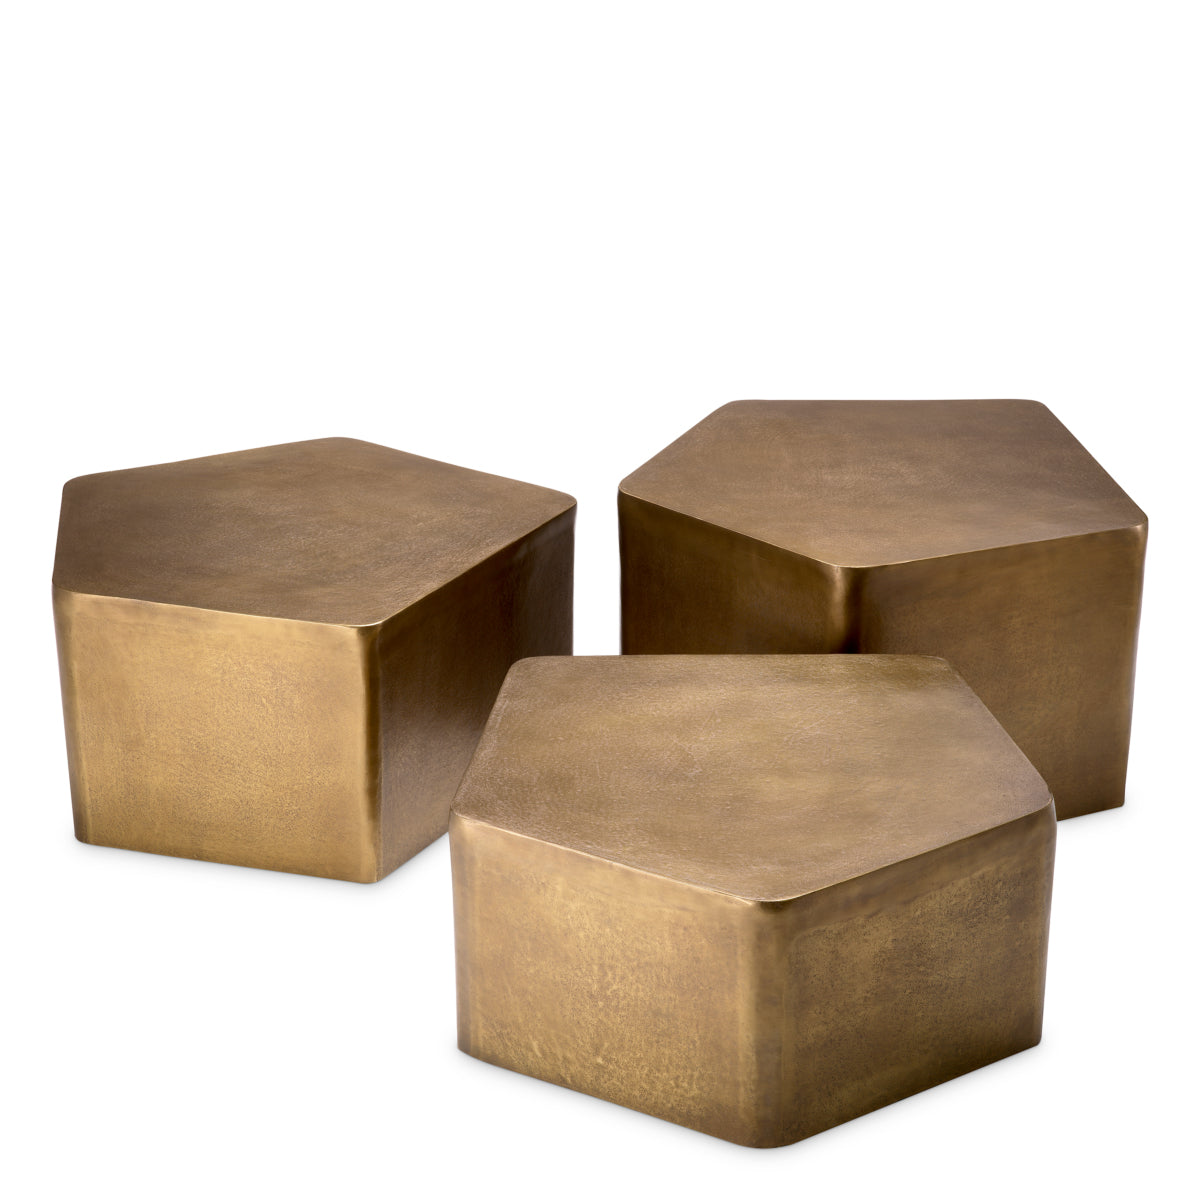 Coffee table Eichholtz Veenazza set of 3